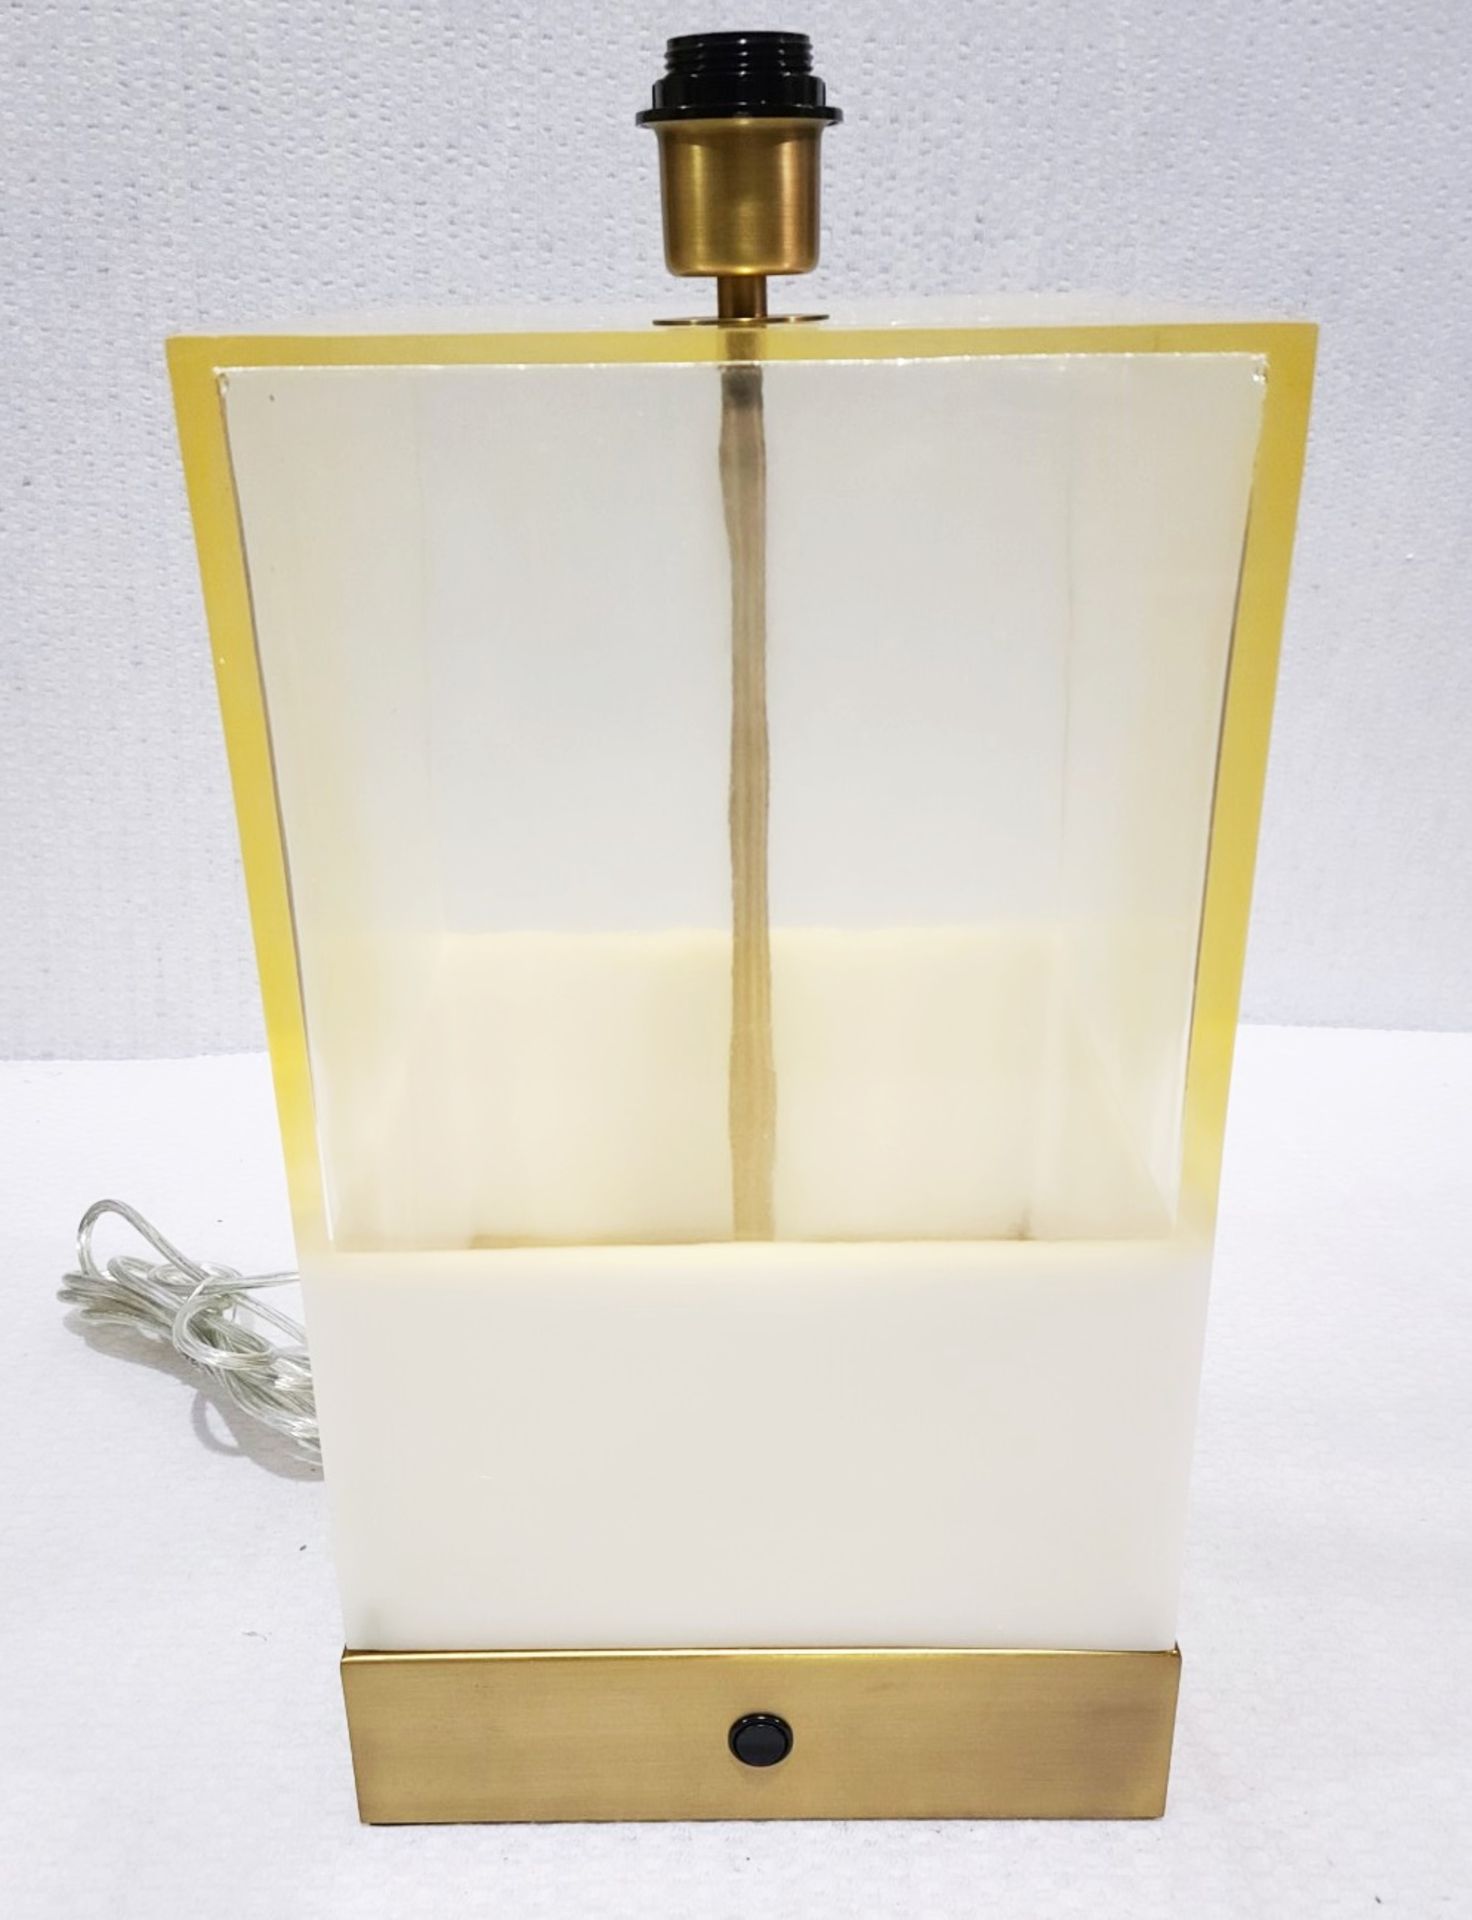 1 x CHELSOM Rectangular Gold Tinted Glass Box Table Lamp With Stone Lower Third And Brass Base